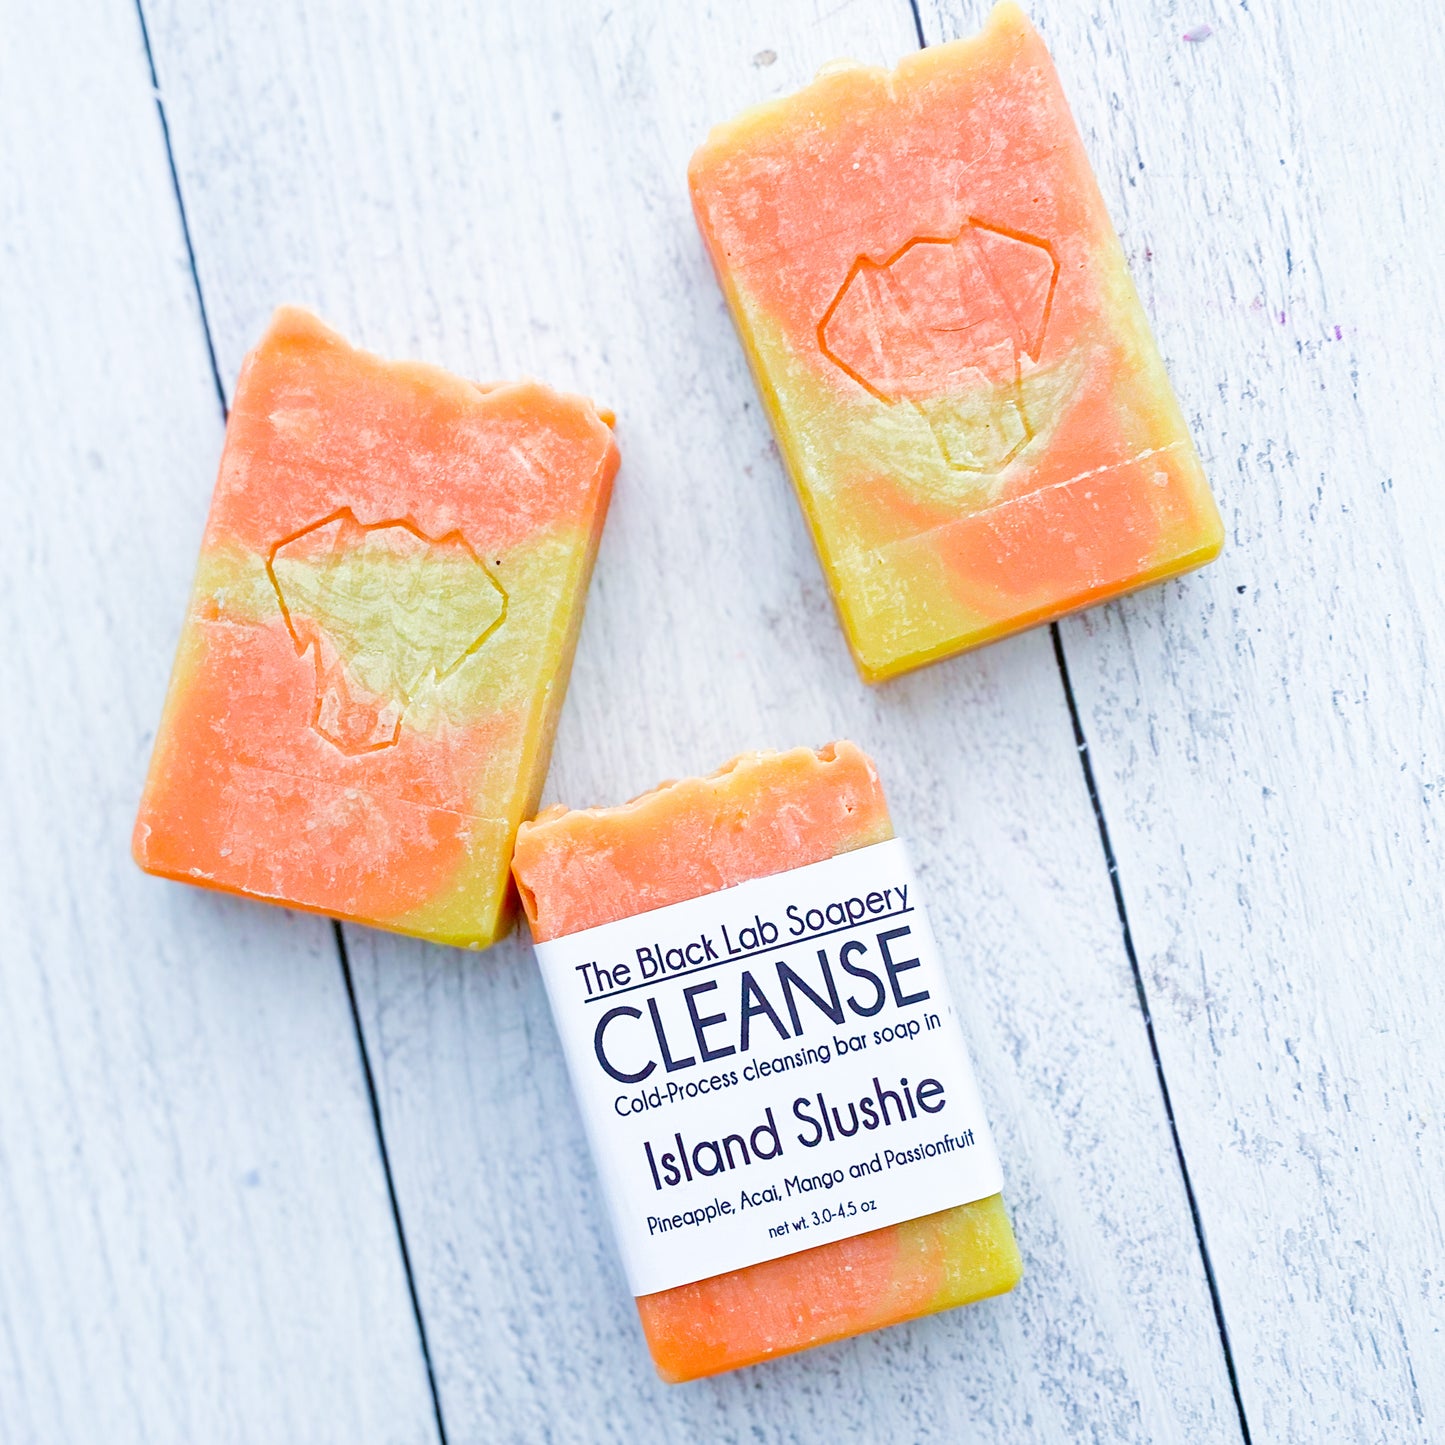 CLEANSE - Cold Process Cleansing Bar Soap - Island Slushie